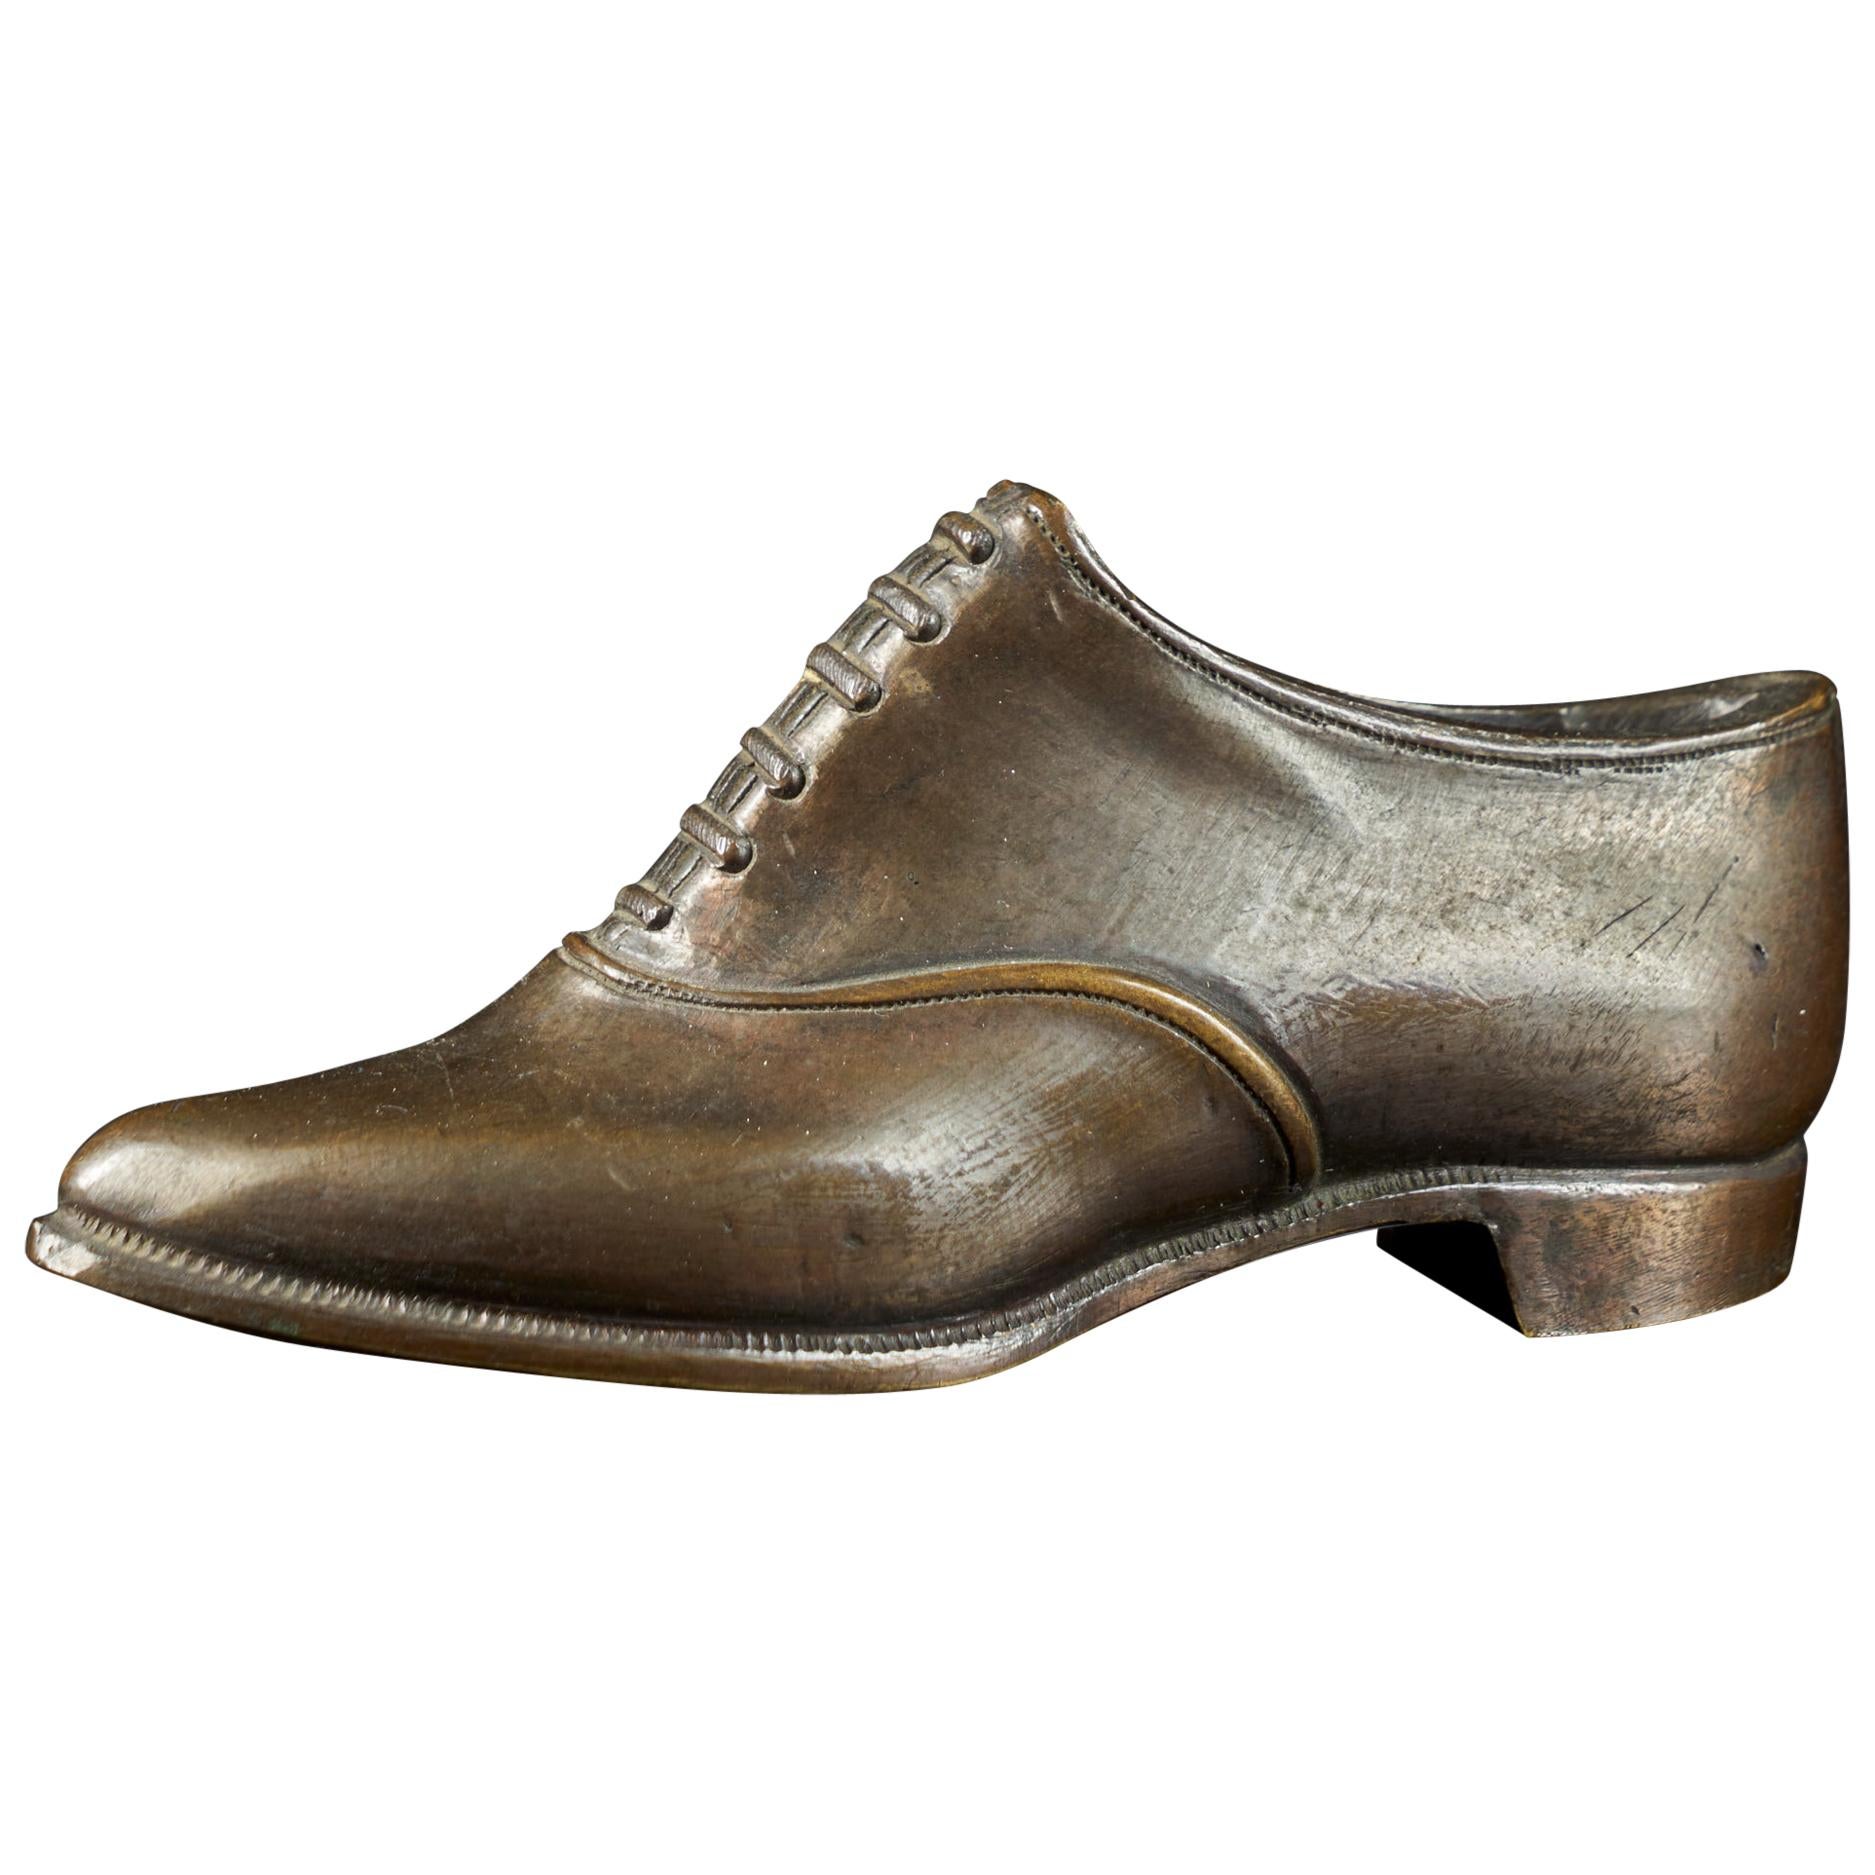 19th Century Bronze Miniature Shoe Model Used as Paperweight